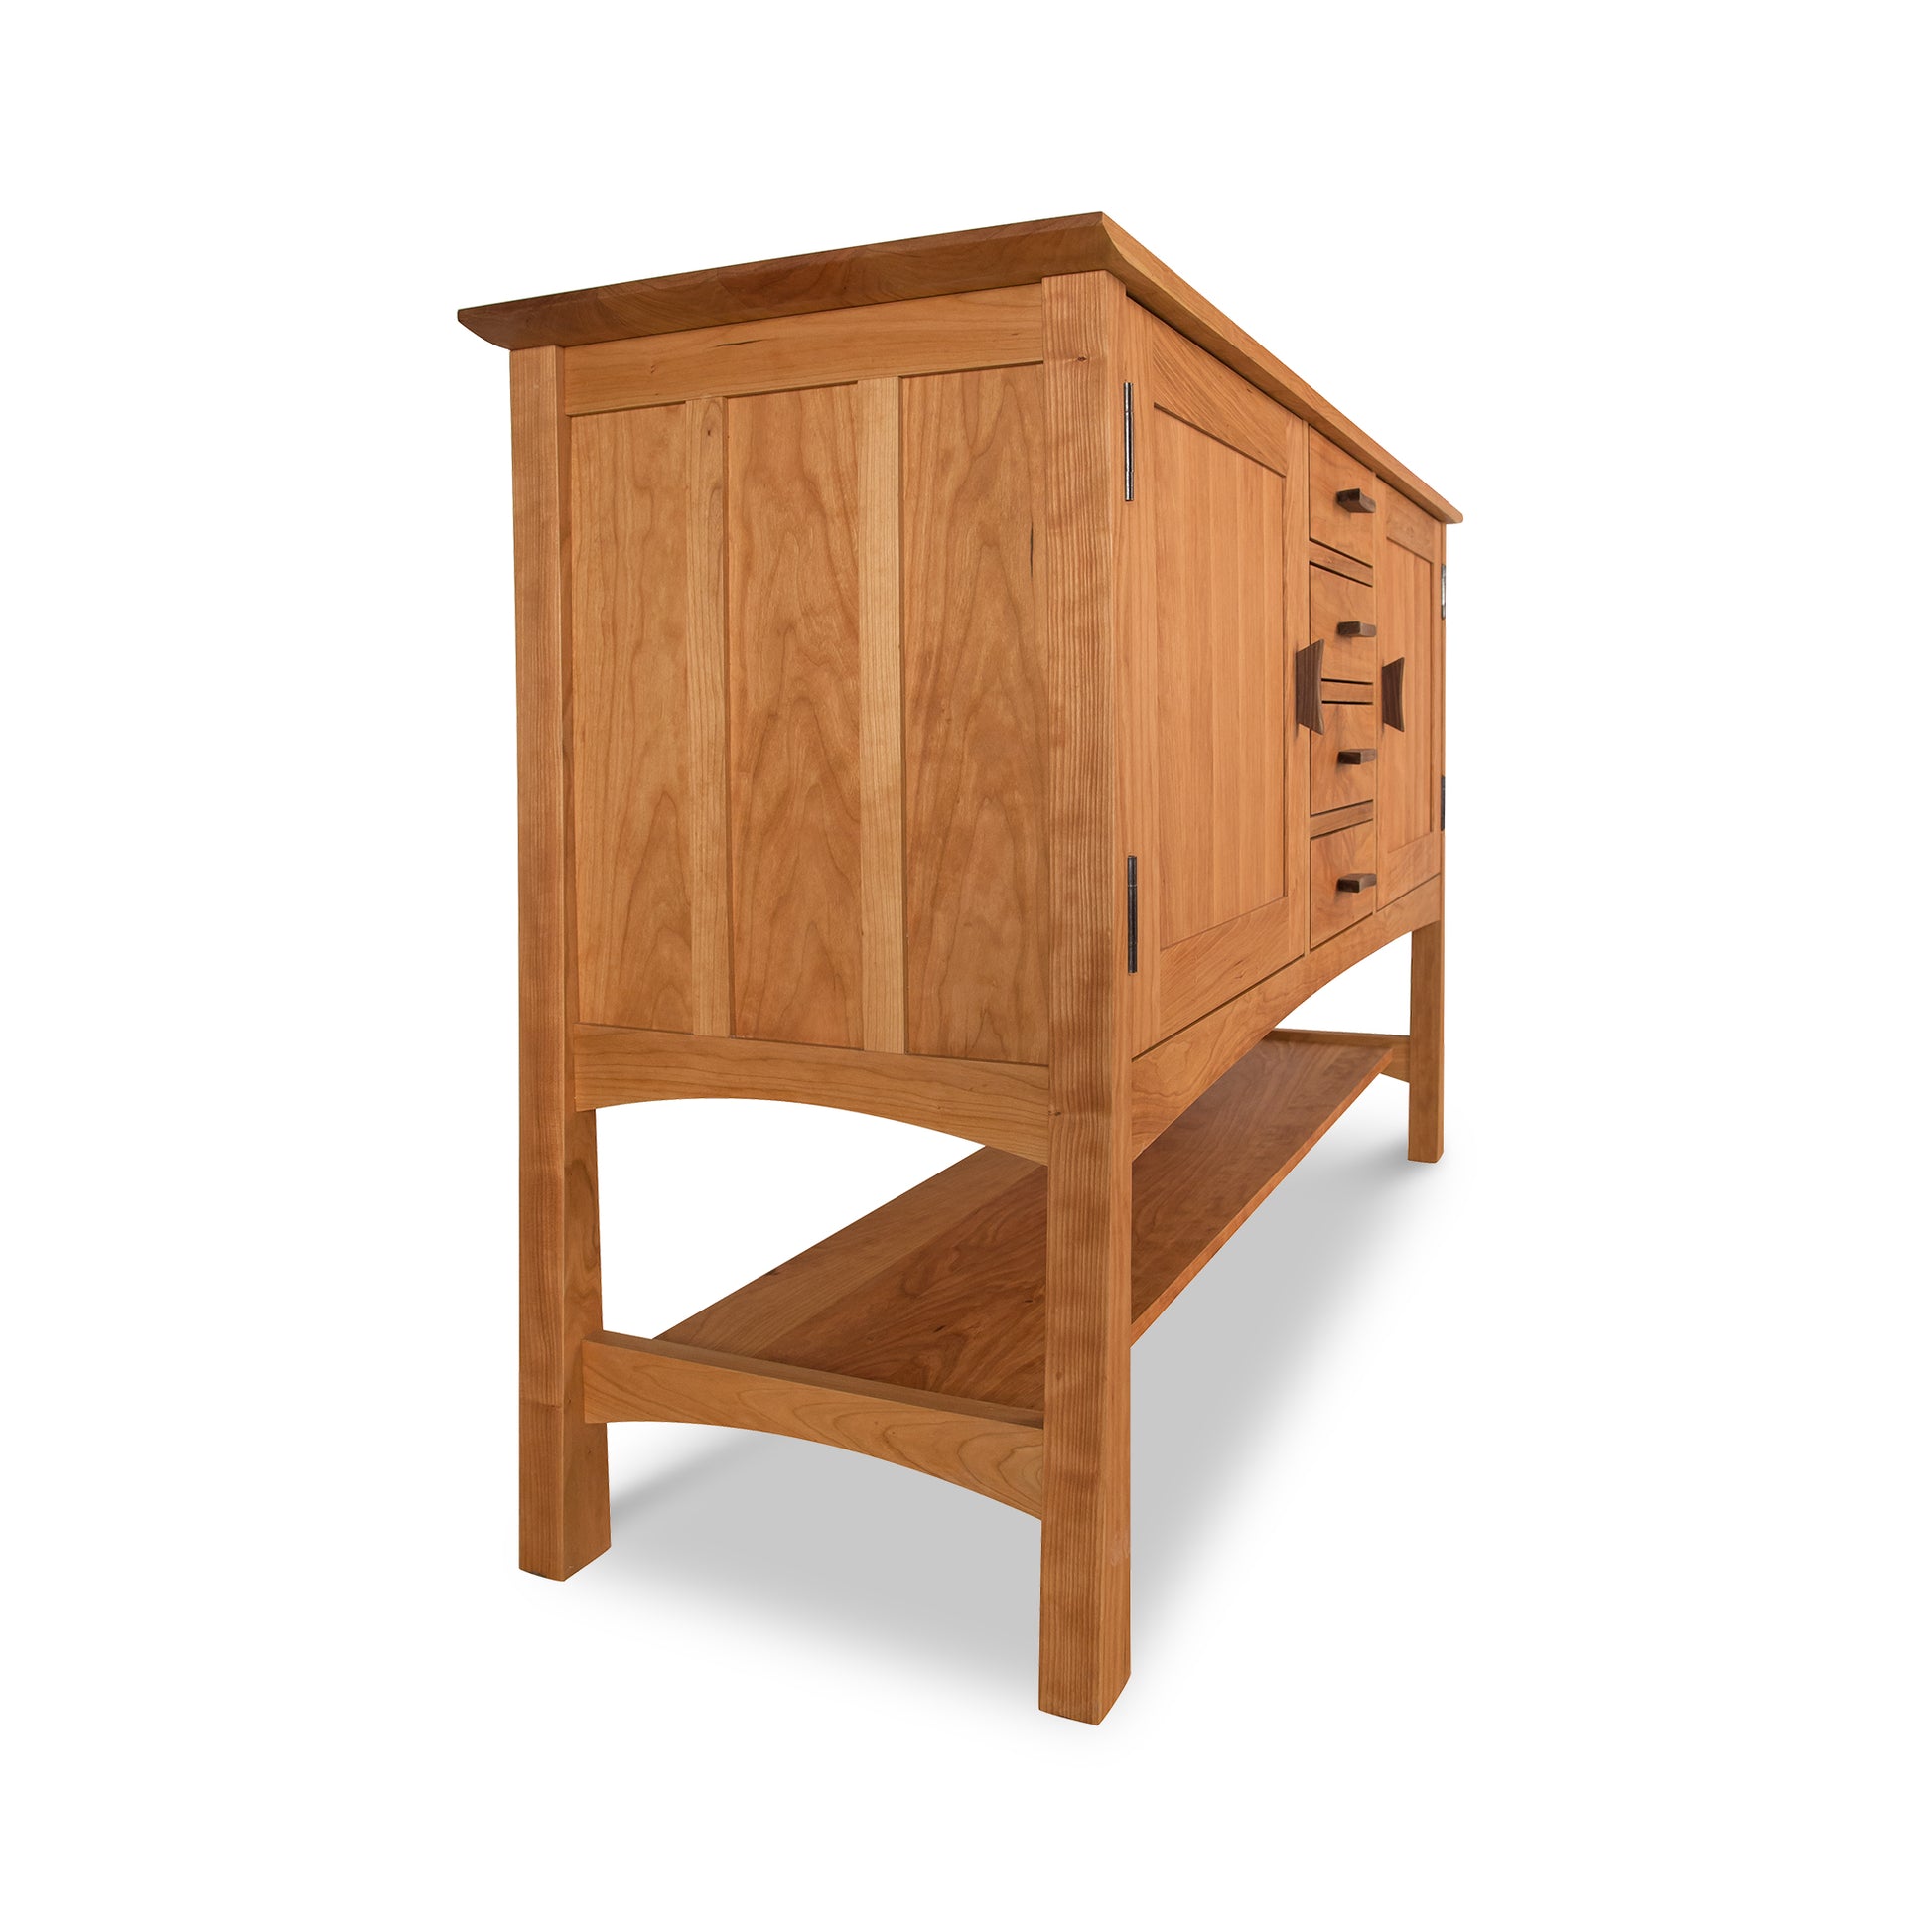 A beautifully crafted Vermont Furniture Designs Contemporary Craftsman Huntboard, perfect for dining storage. This huntboard features ample drawers and shelves for organization.